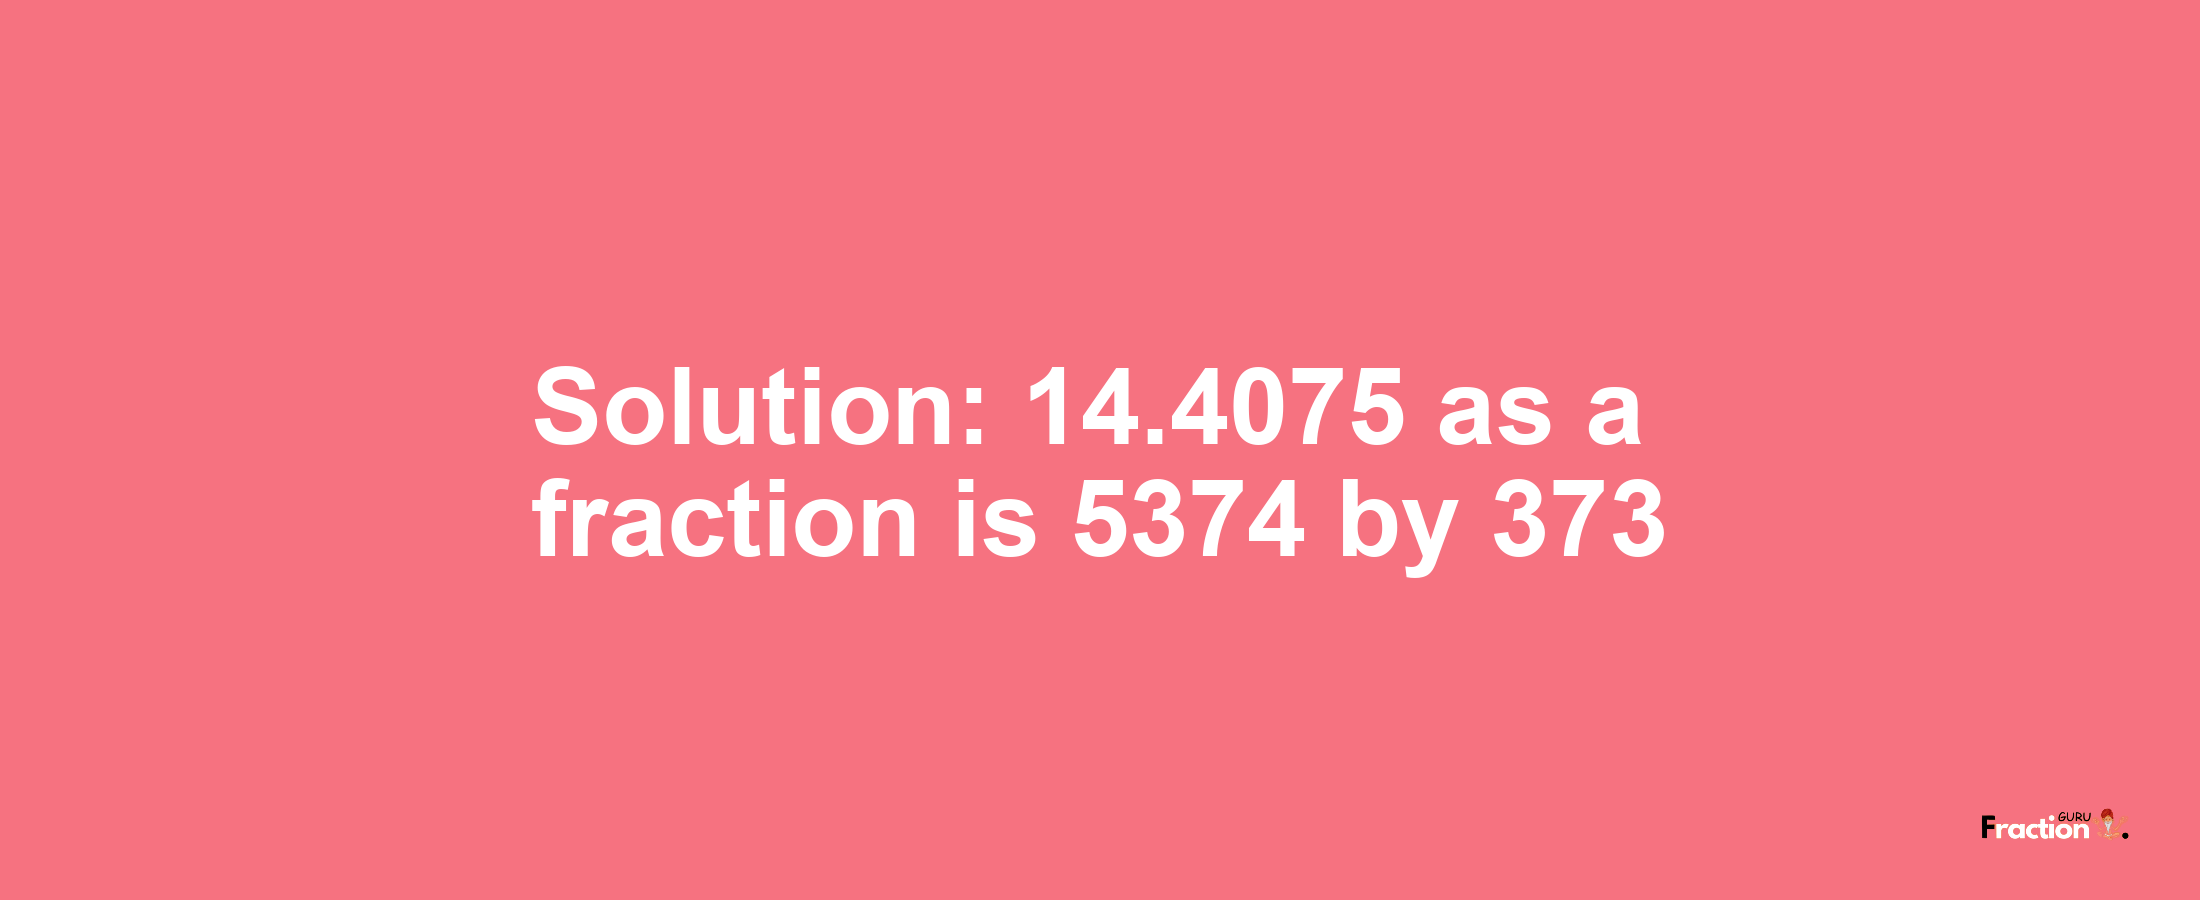 Solution:14.4075 as a fraction is 5374/373